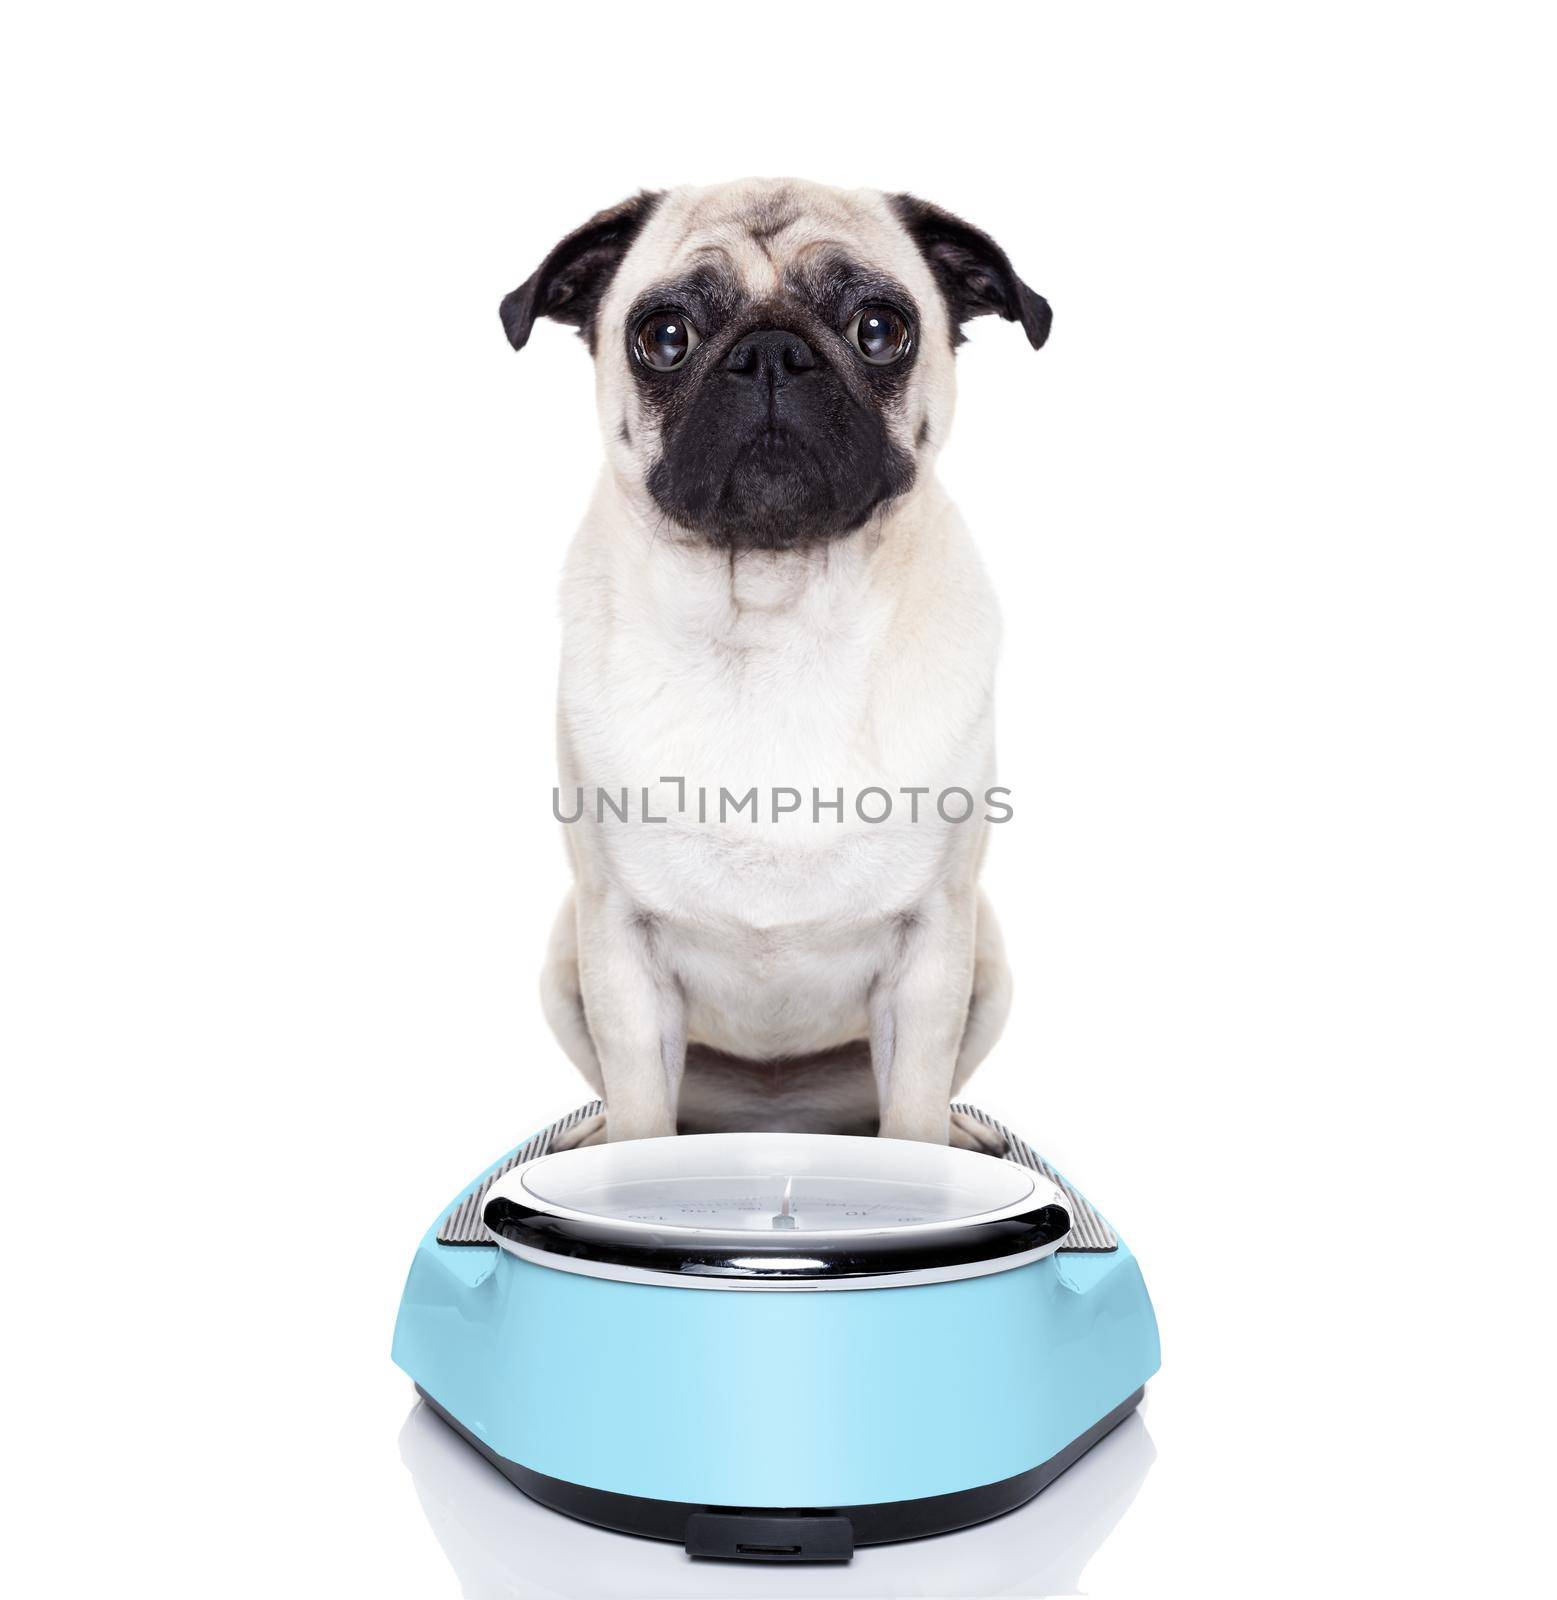 fat dog on scale by Brosch